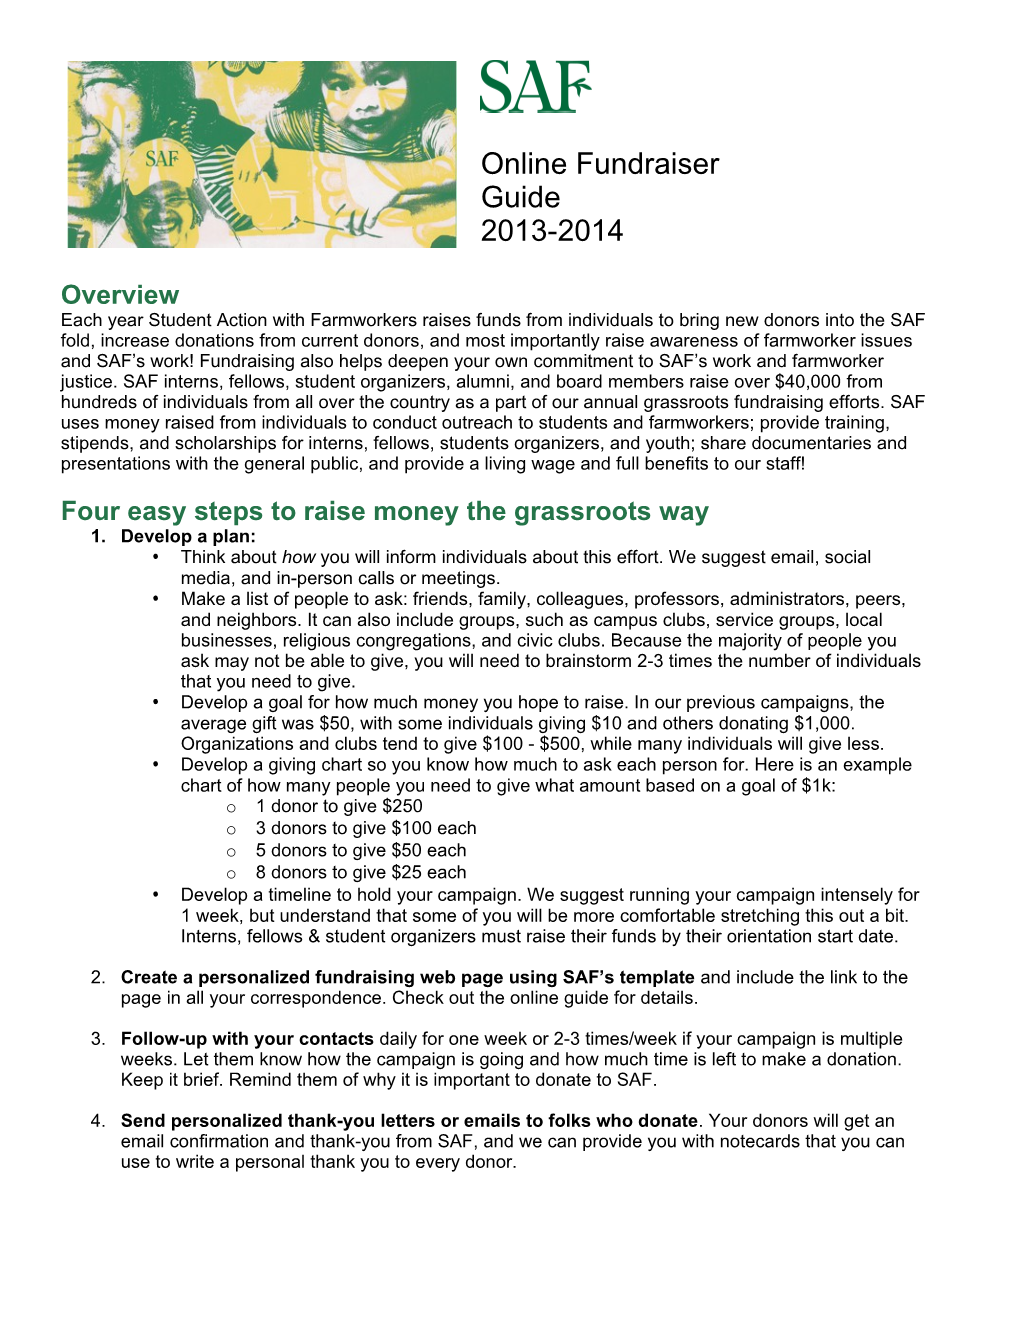 Four Easy Steps to Raise Money the Grassroots Way